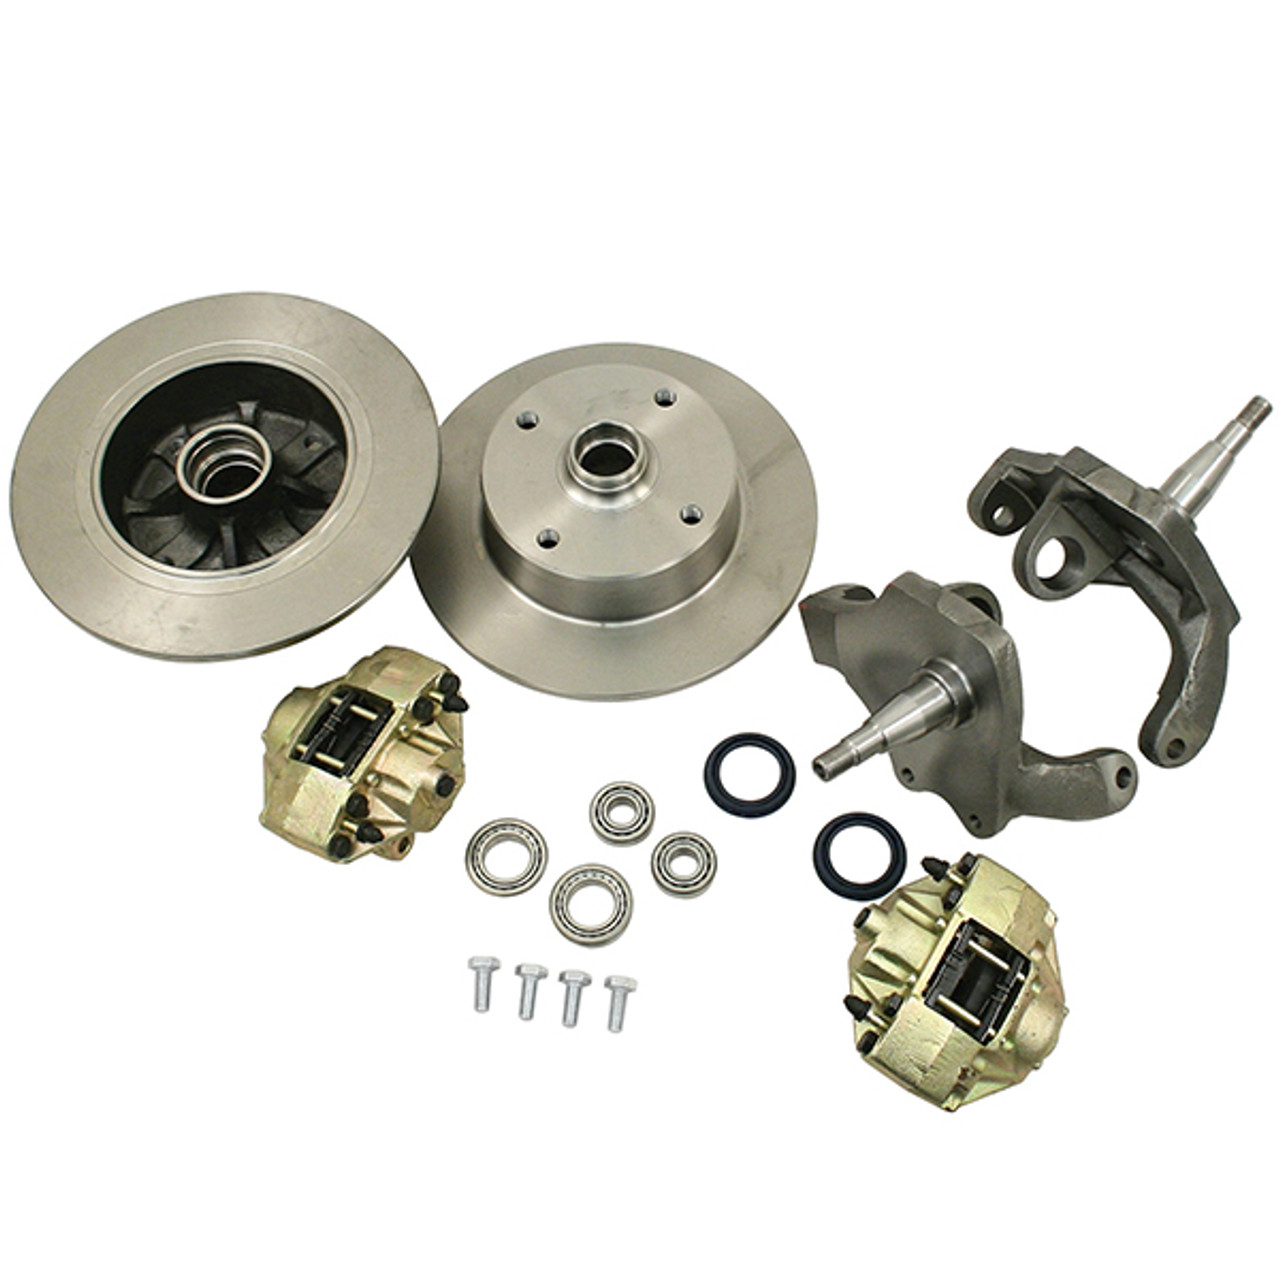 ACC-C10-4121 - DELUXE BALL-JOINT DISC BRAKE KIT WITH DROPPED OR STOCK  SPINDLES - GERMAN W/BRG INCLUDED (SIMILAR TO EMPI 22-2886) - STANDARD  BEETLE 